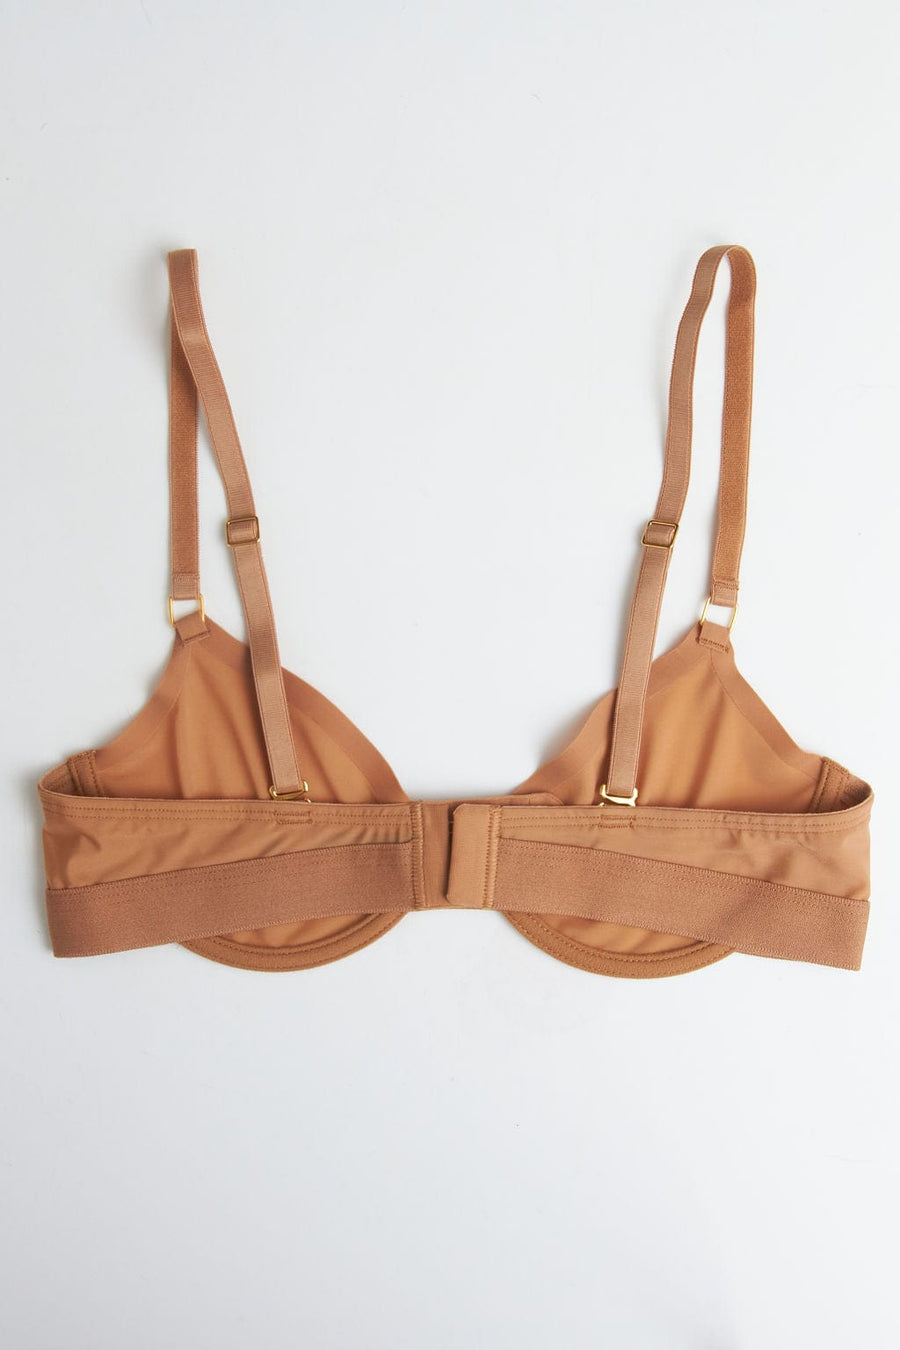 Sheer Unlined Bras  The Best Bras for Small Busts – Pepper